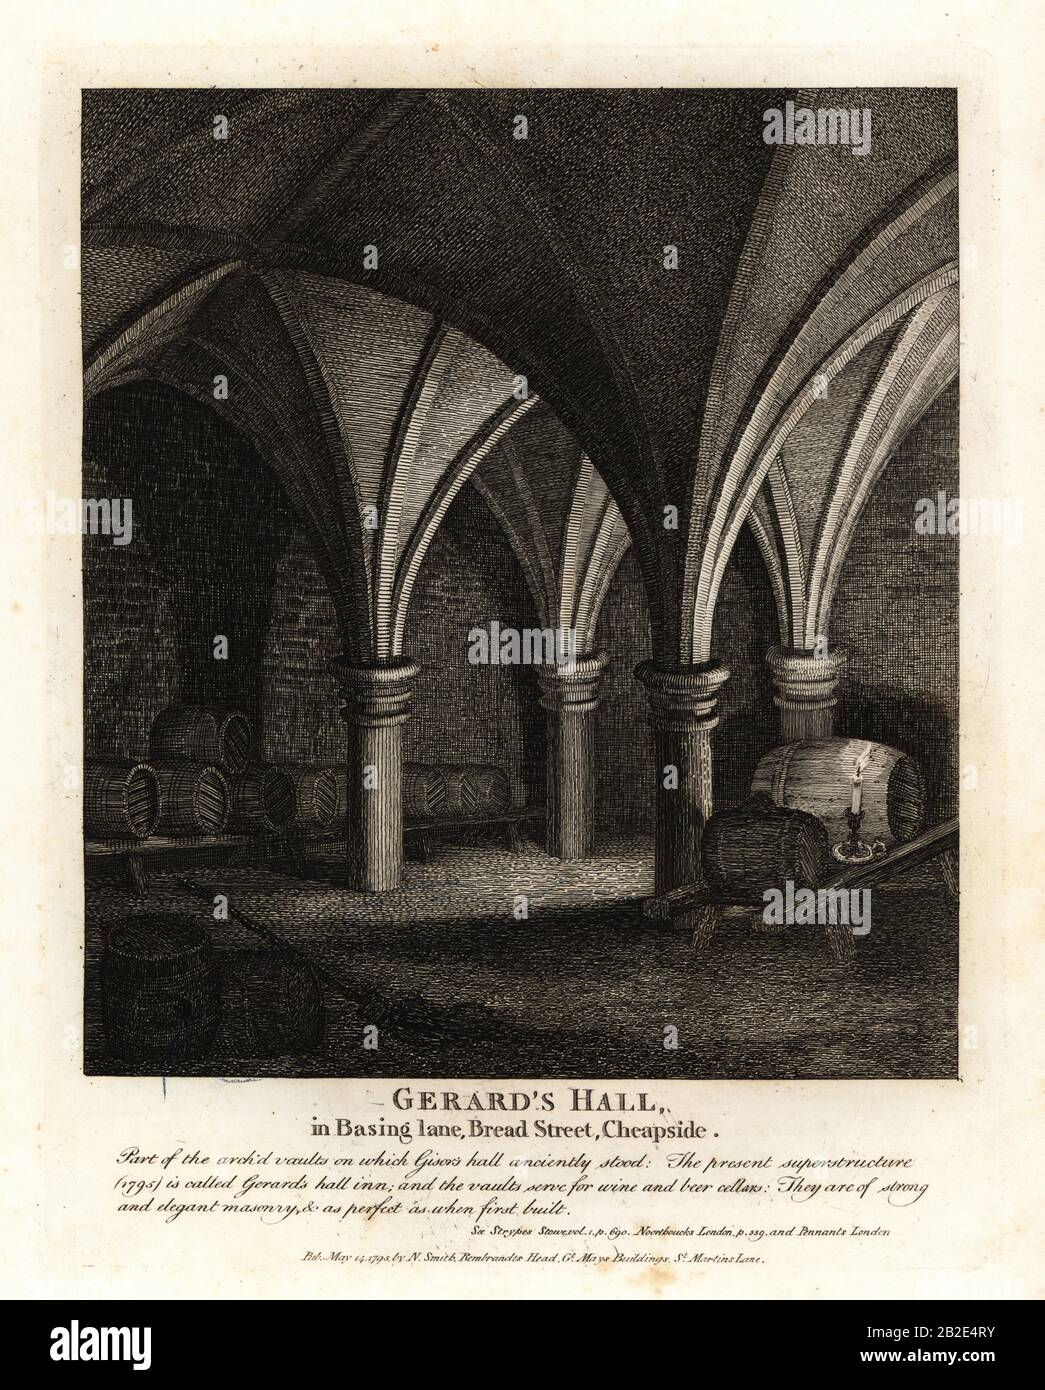 Underground vaults in Gerard’s Hall Inn in Basing Lane, Bread Street, Cheapside, 1795. Copperplate engraving by John Thomas Smith after original drawings by members of the Society of Antiquaries from his J.T. Smith’s Antiquities of London and its Environs, J. Sewell, R. Folder, J. Simco, London, 1795. Stock Photo